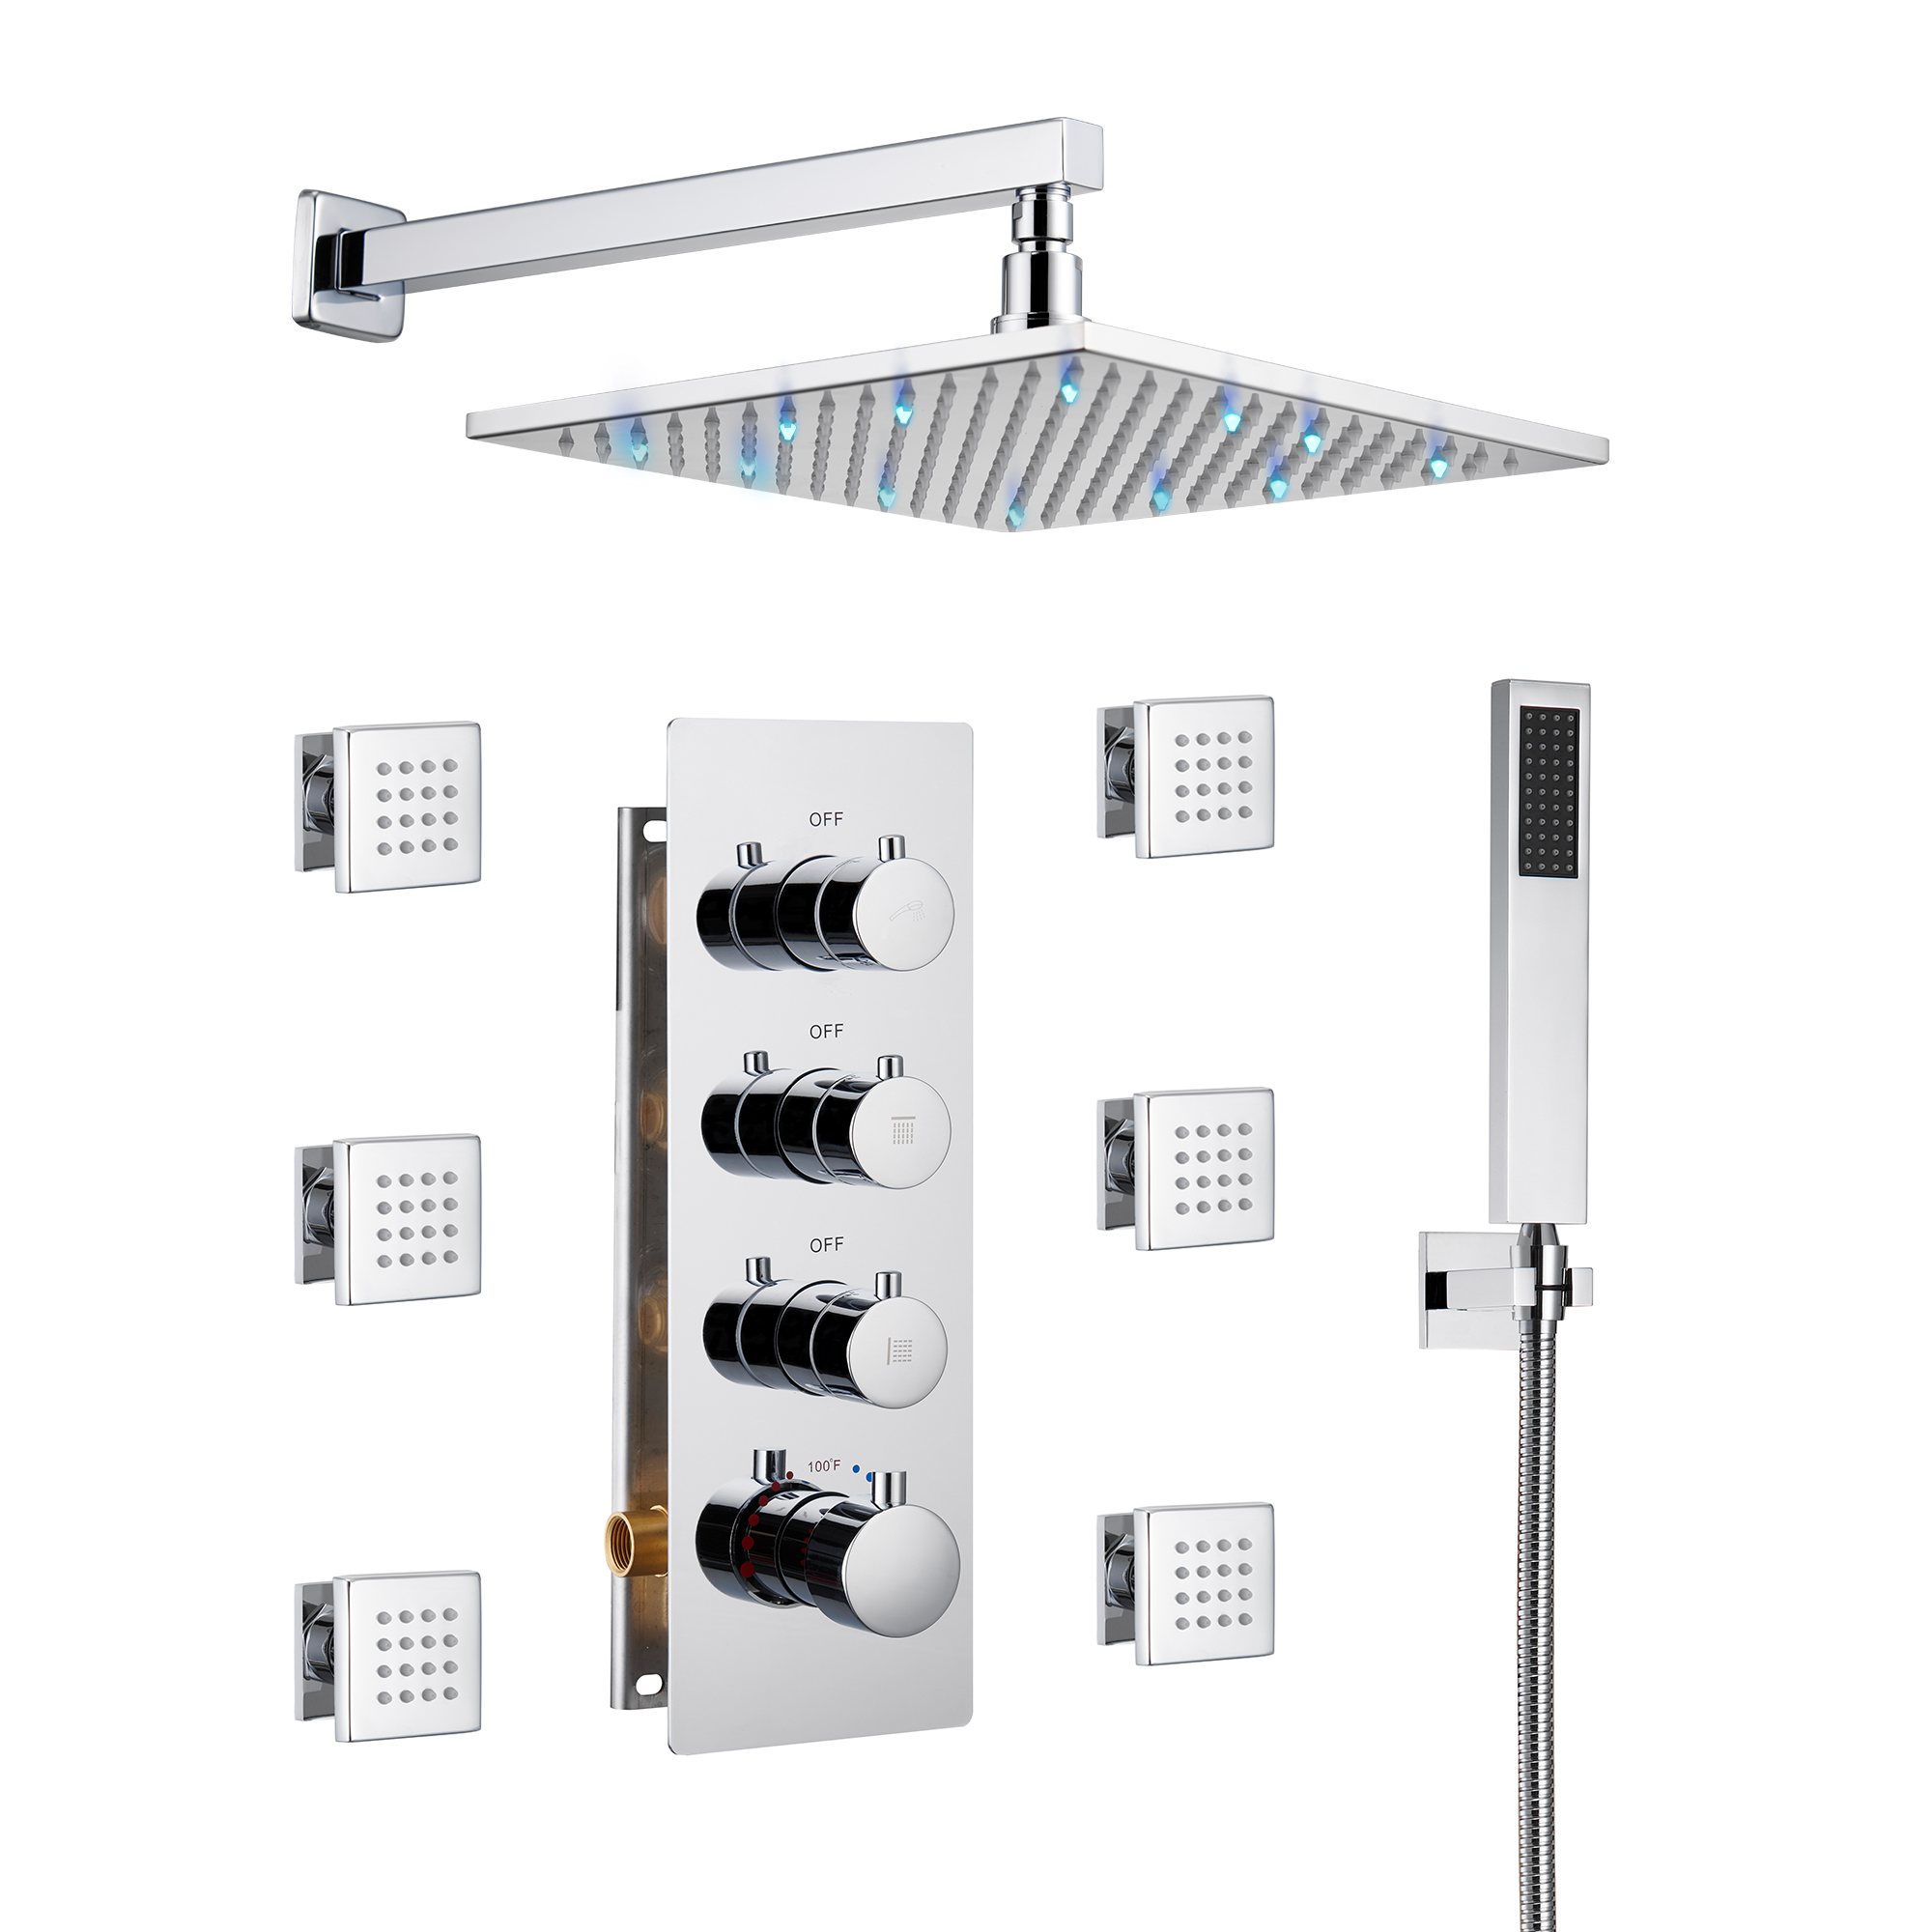 CH-Mondawe Luxury Wall Mount Rain Shower Head with 6 Shower Jet and LED 3-Spray Patterns Thermostatic 12 in. -Mondawe